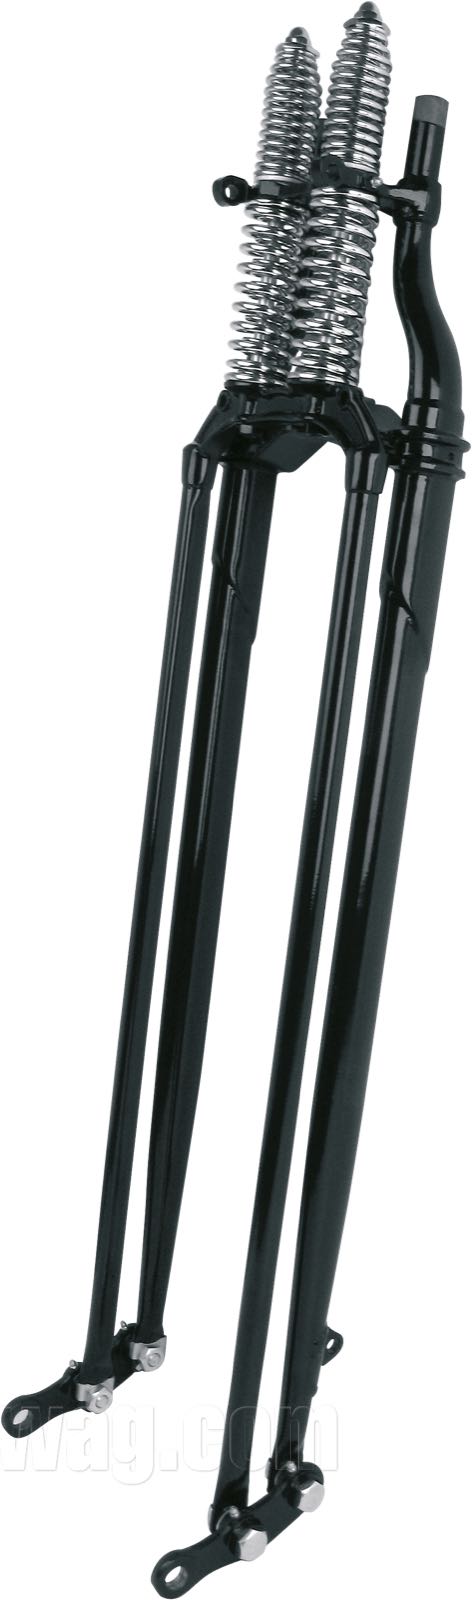 W&W Cycles - Classic Springer Forks ≥8” Longer than Stock for